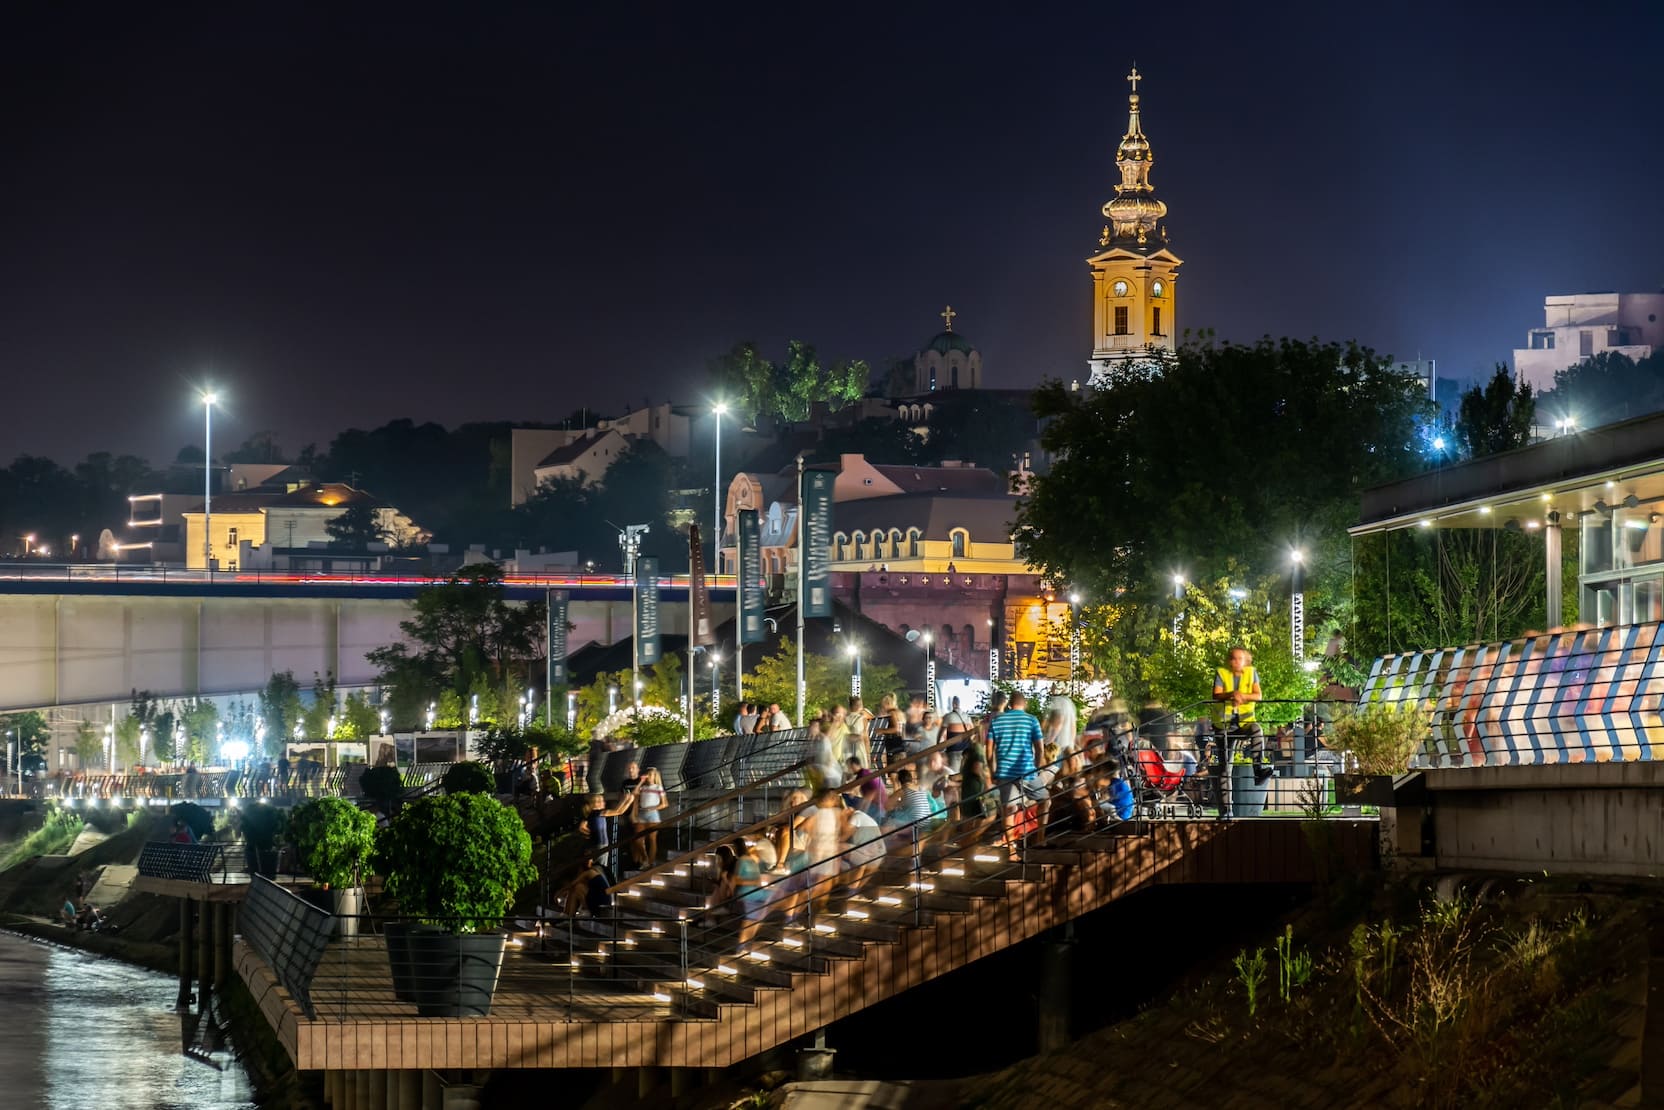 Belgrade Waterfront – Everything you want from life and even more